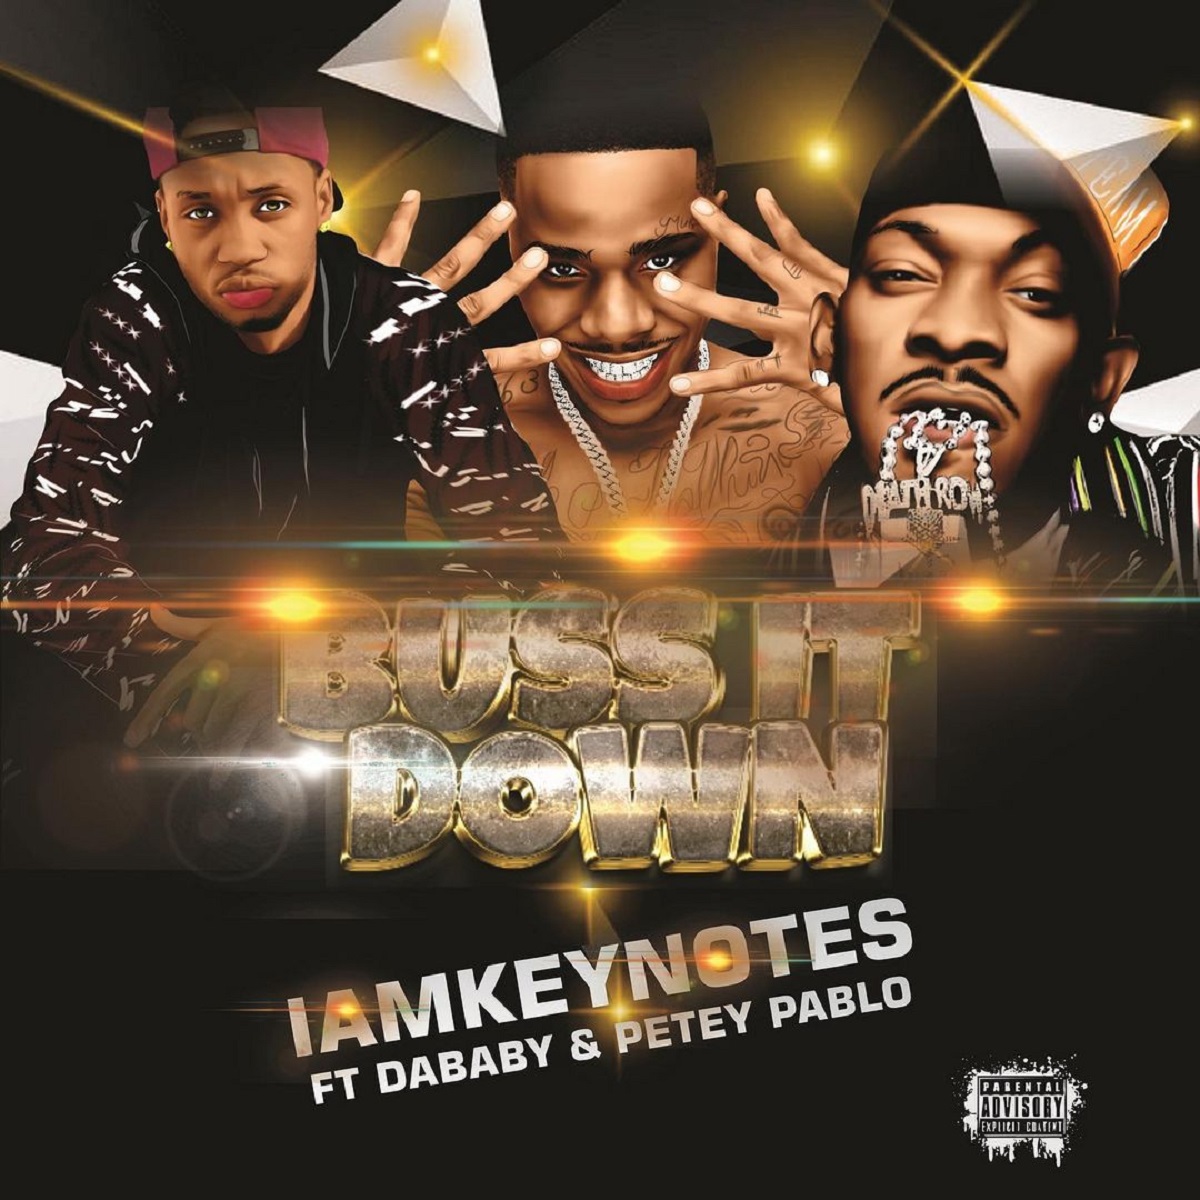 Iamkeynotes balls out with DaBaby and Petey Pablo on Buss It Down